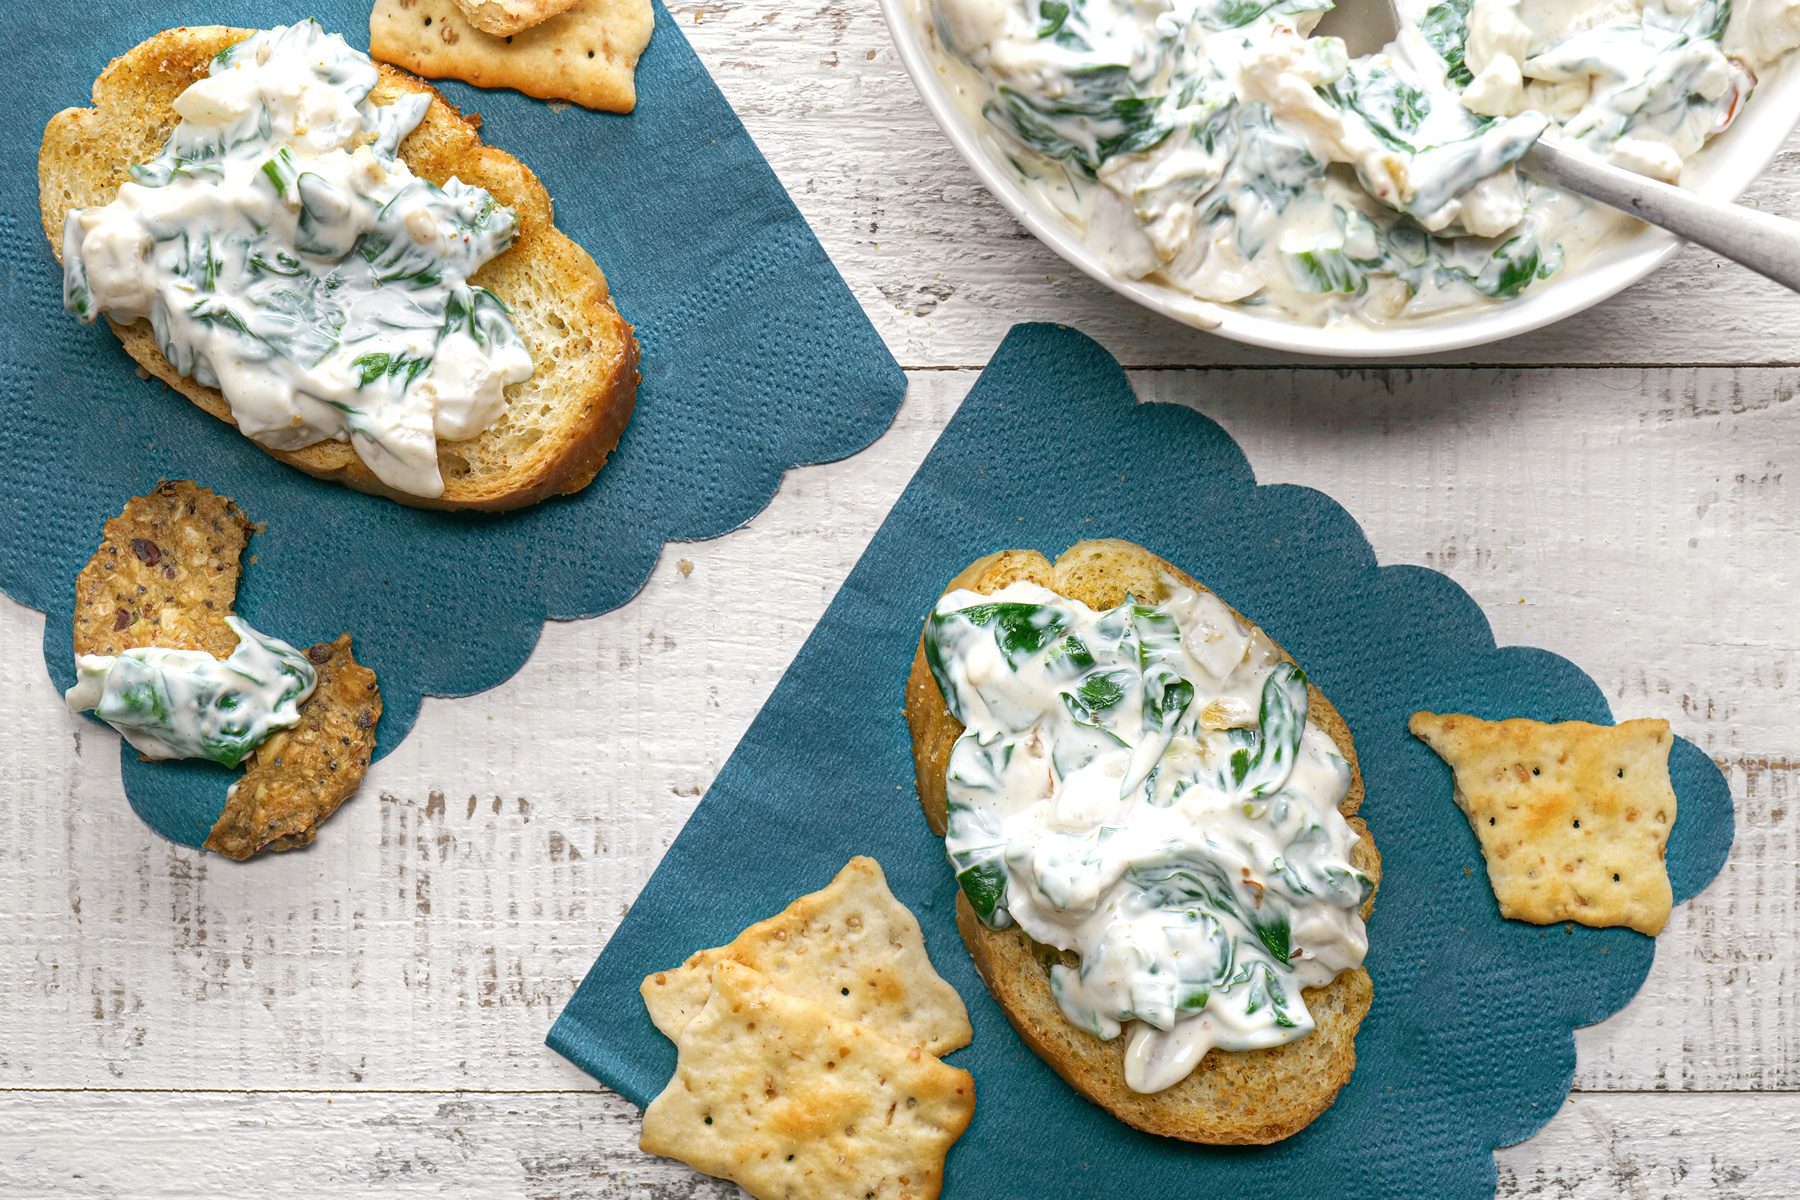 Spinach dip served with crusty breads, crackers and tortilla chips. 